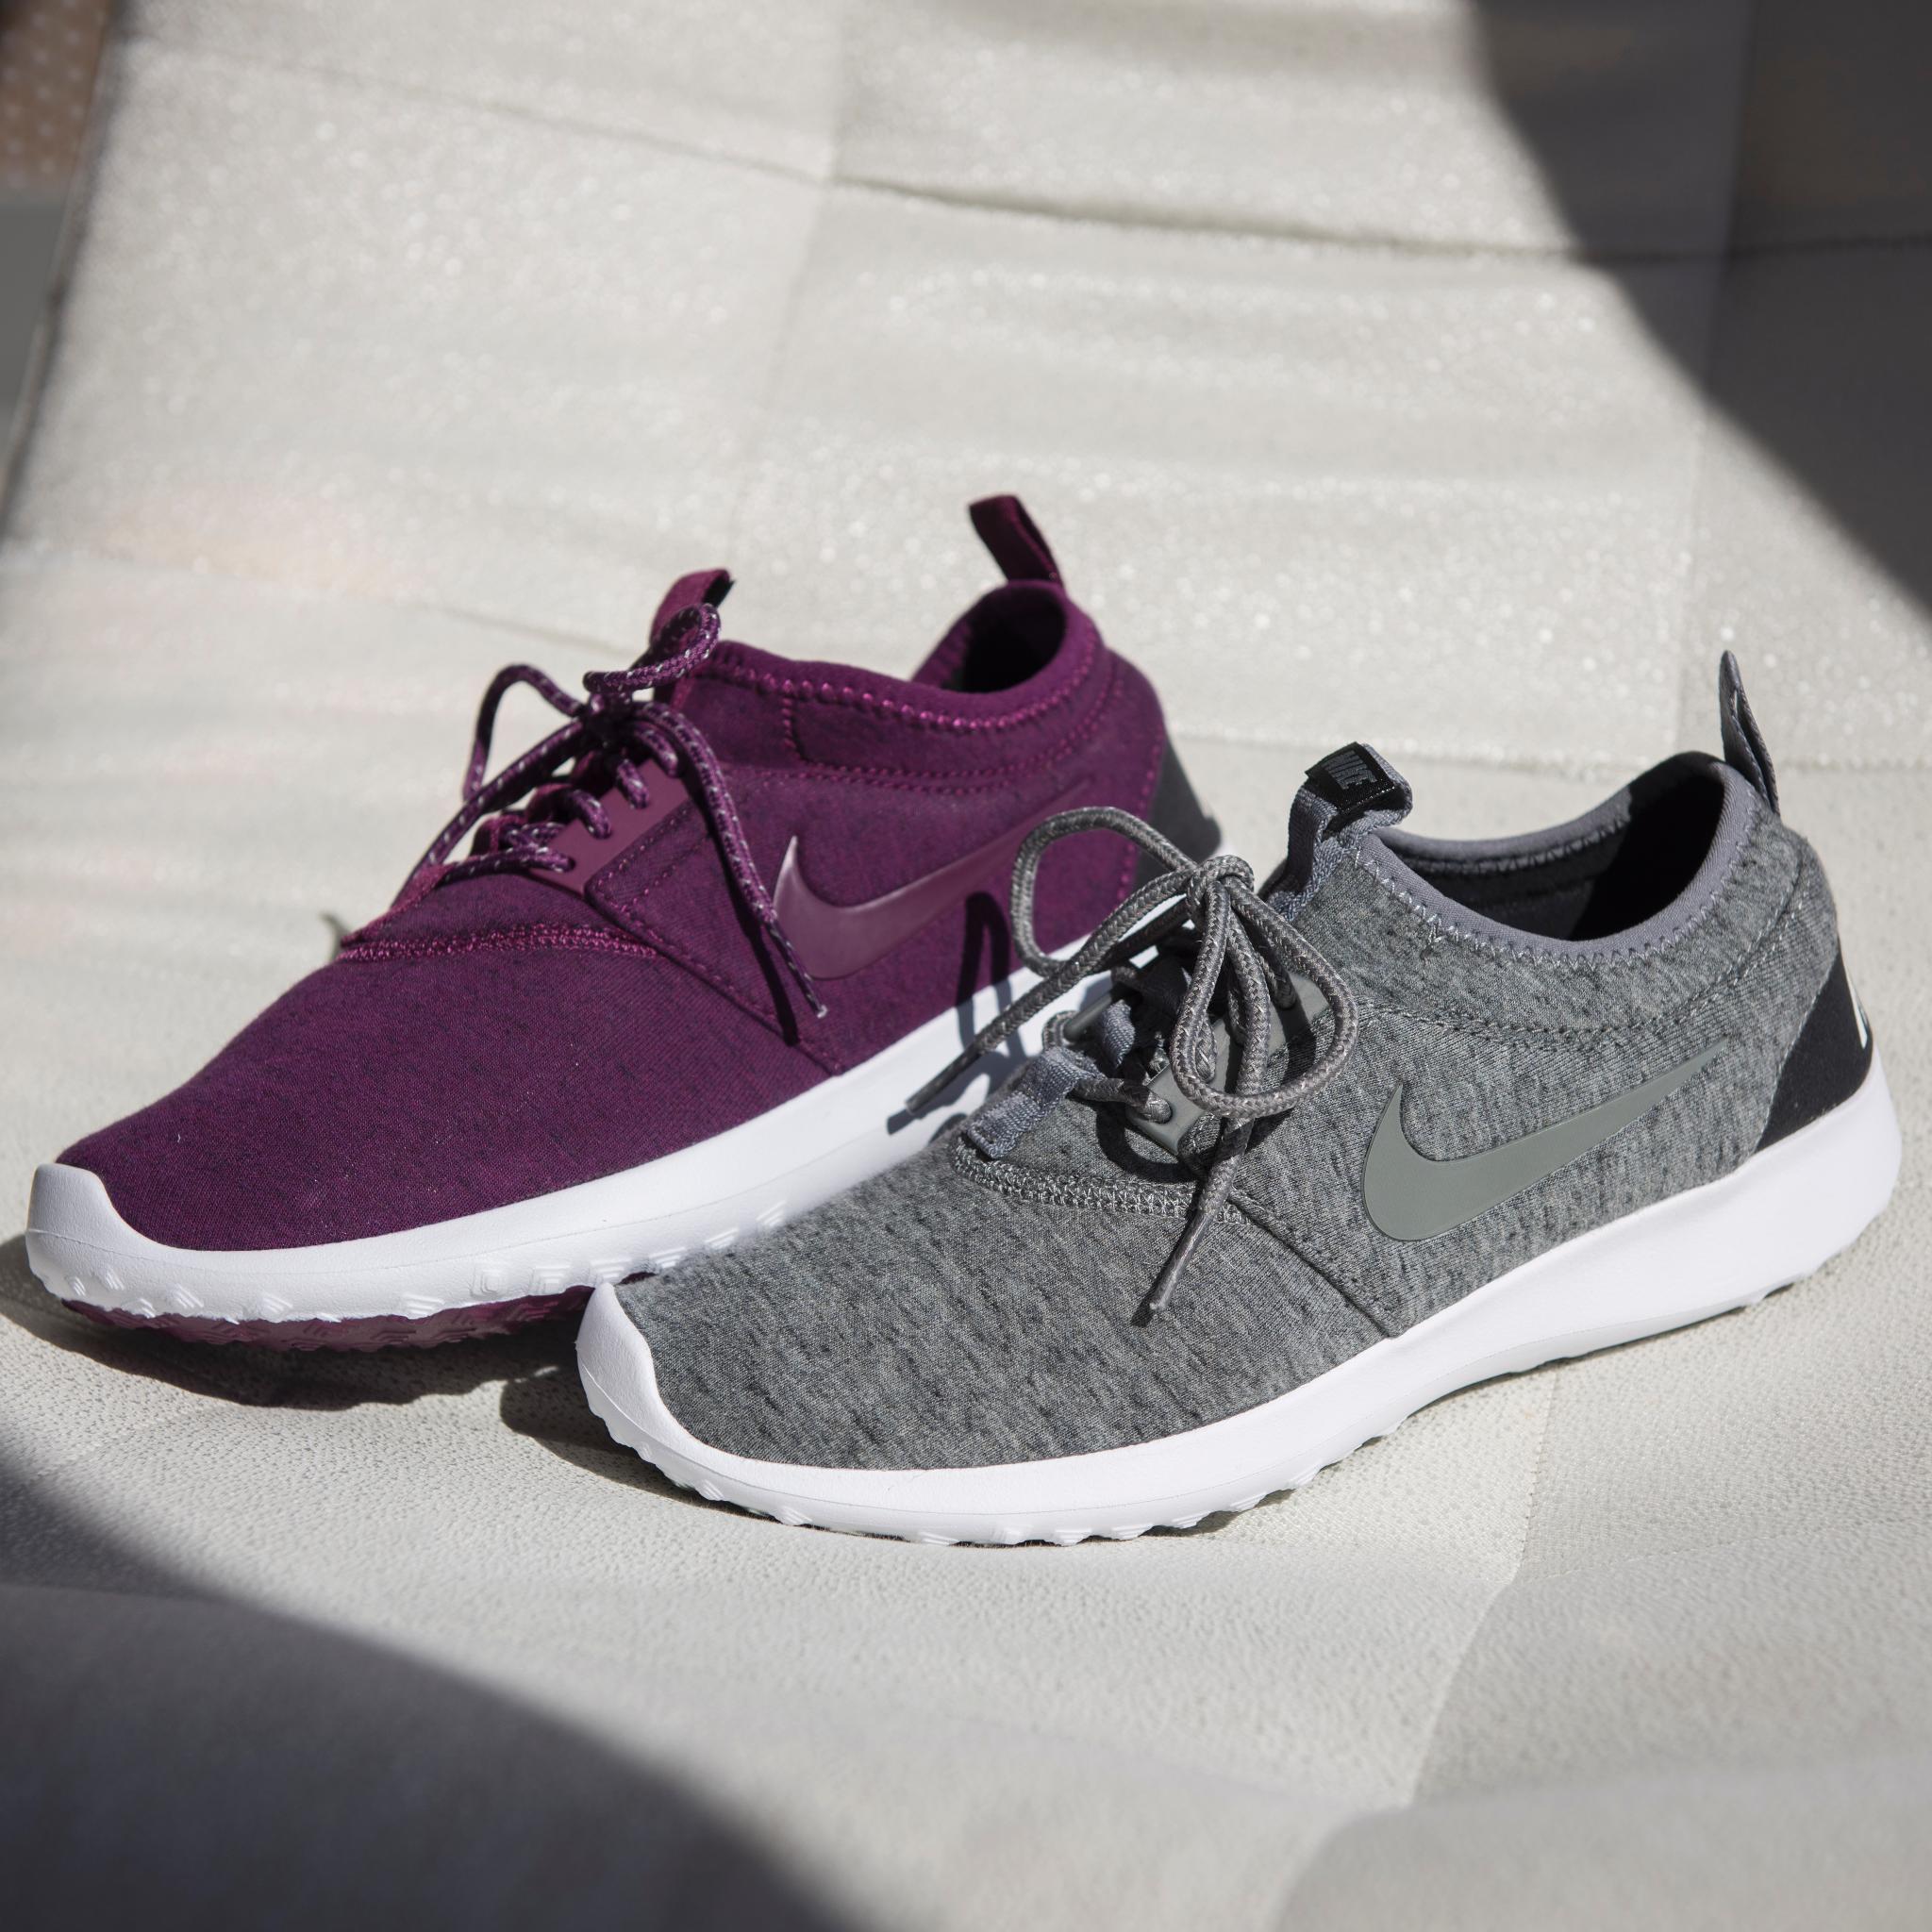 Kunde overfladisk Saks Finish Line on Twitter: "The Nike Juvenate Tech Fleece pack is available  now! Grey: http://t.co/uKL6Fbu2Ip Mulberry: http://t.co/xPRbACoY6F  http://t.co/T6679V1xqR" / Twitter